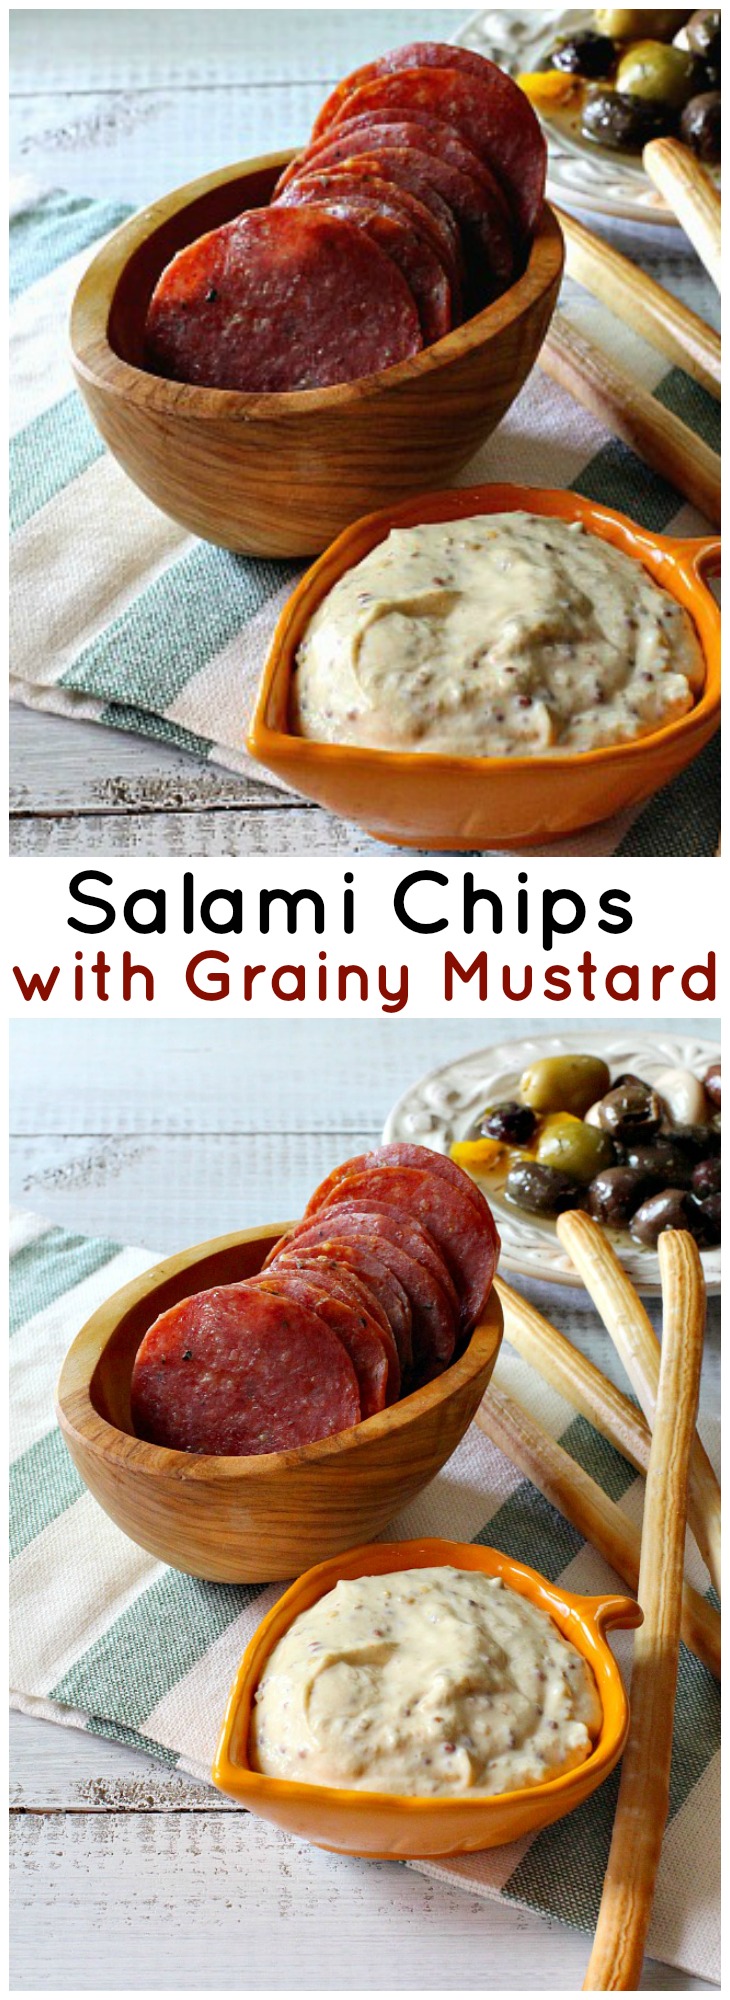 Salami Chips With Grainy Mustard Sauce | Cooking On The Ranch